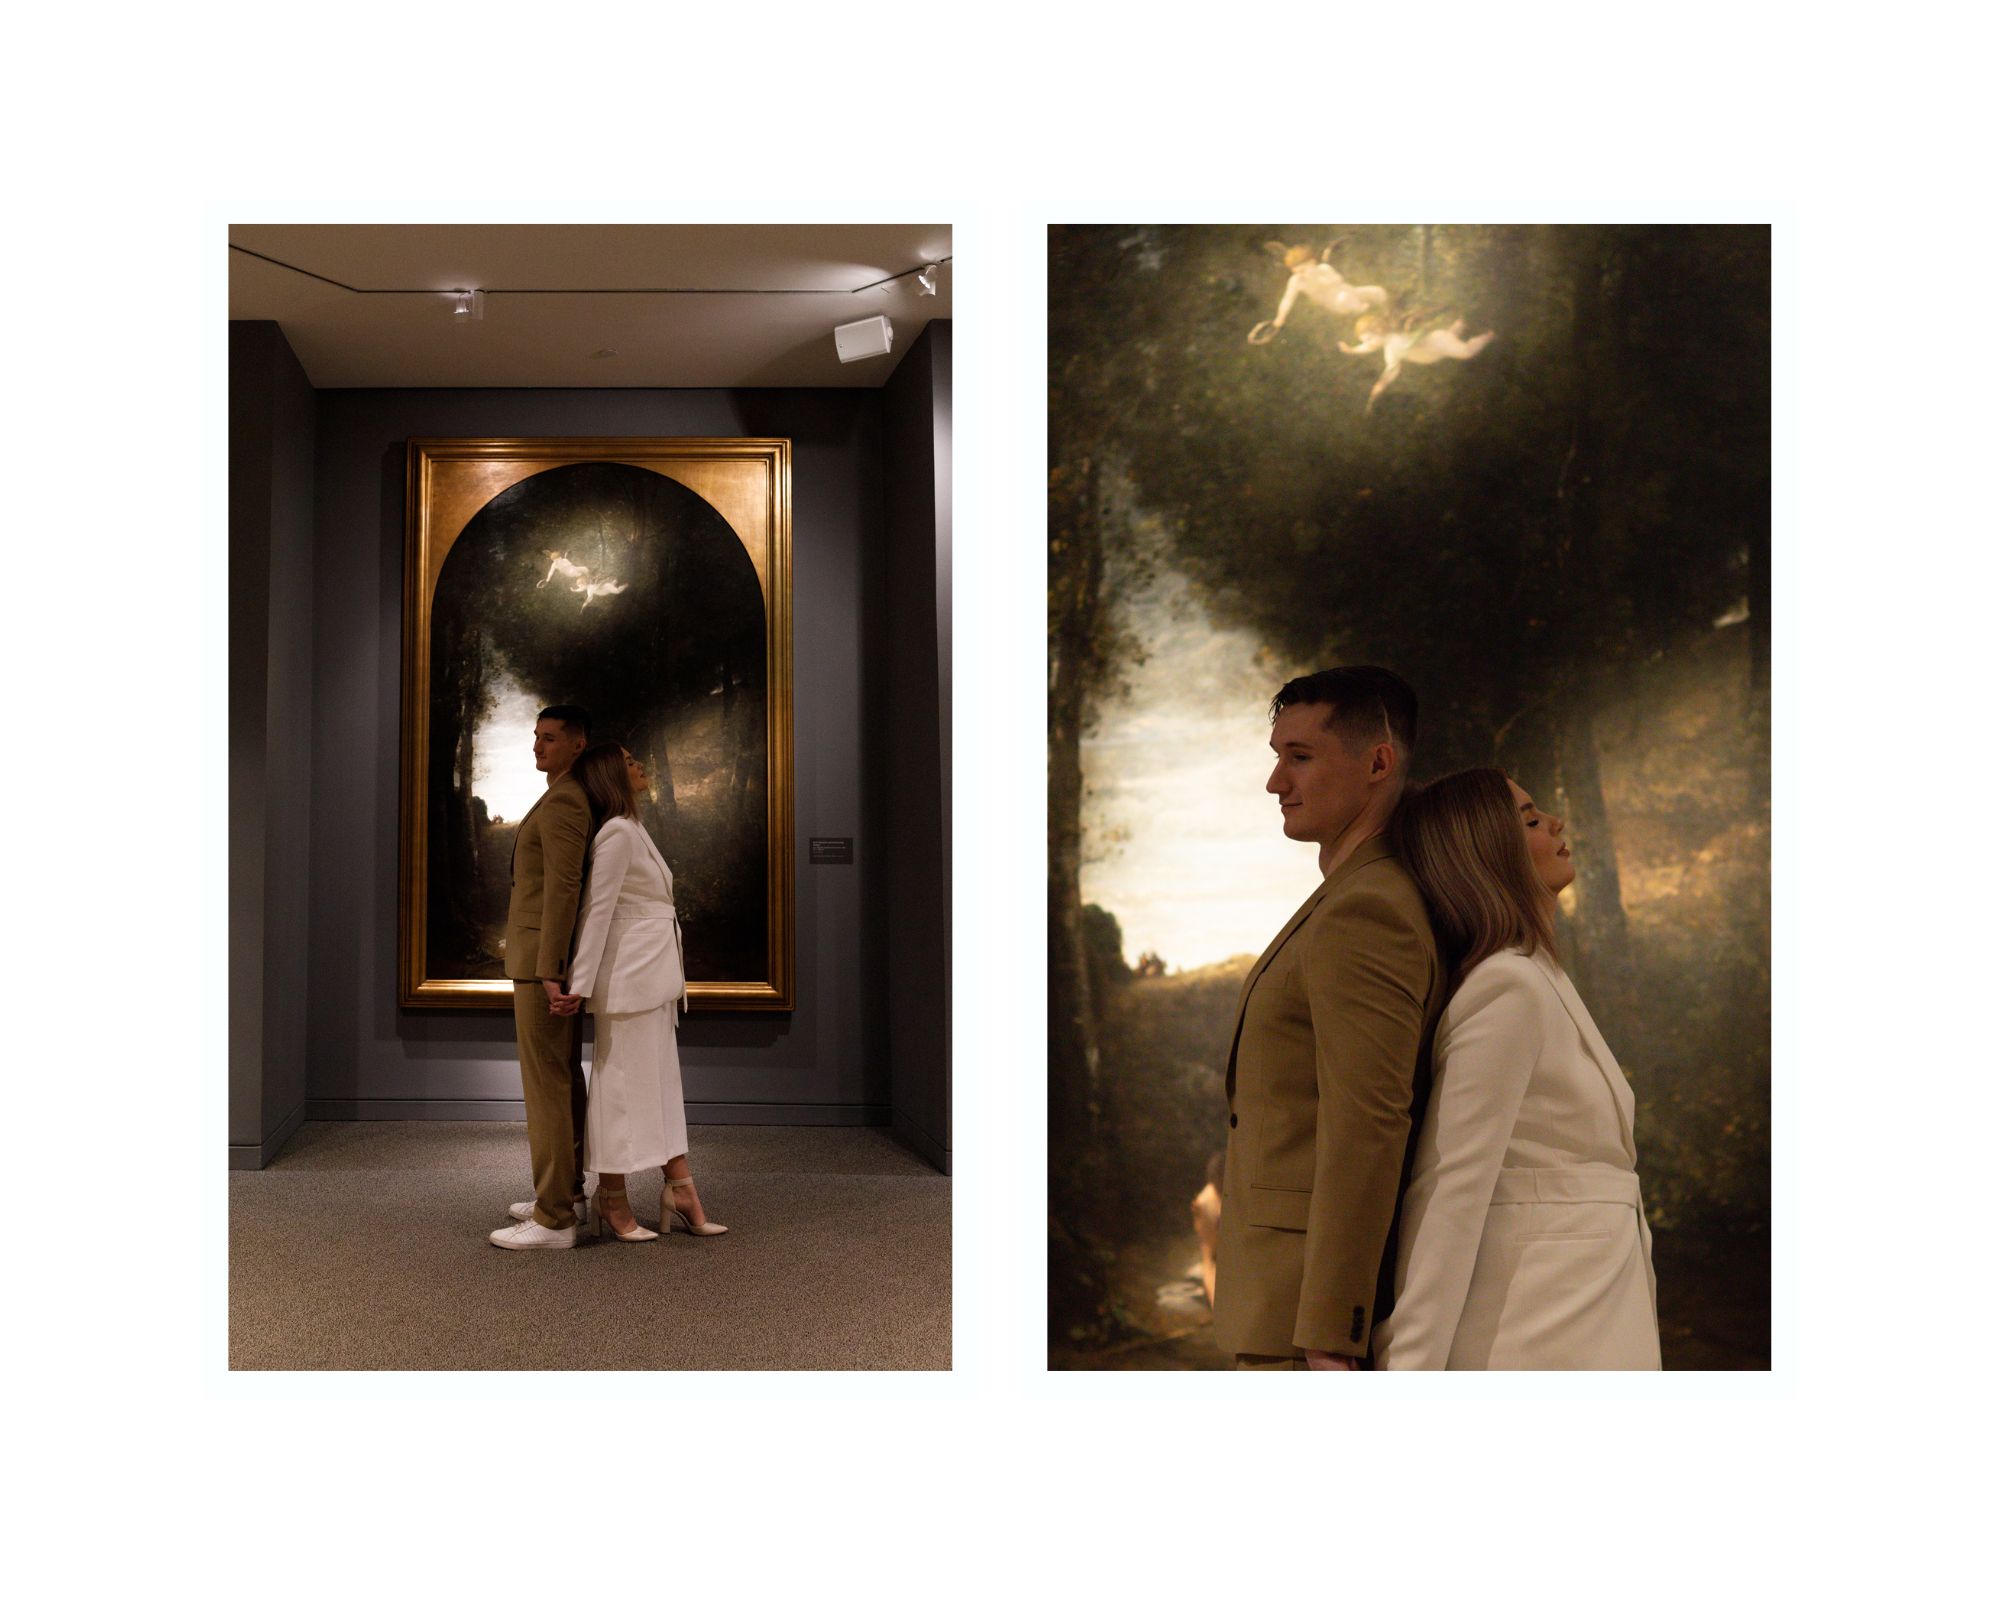 Unique art gallery engagement photos. The couple is standing in front of art and the photo is cropped in close.